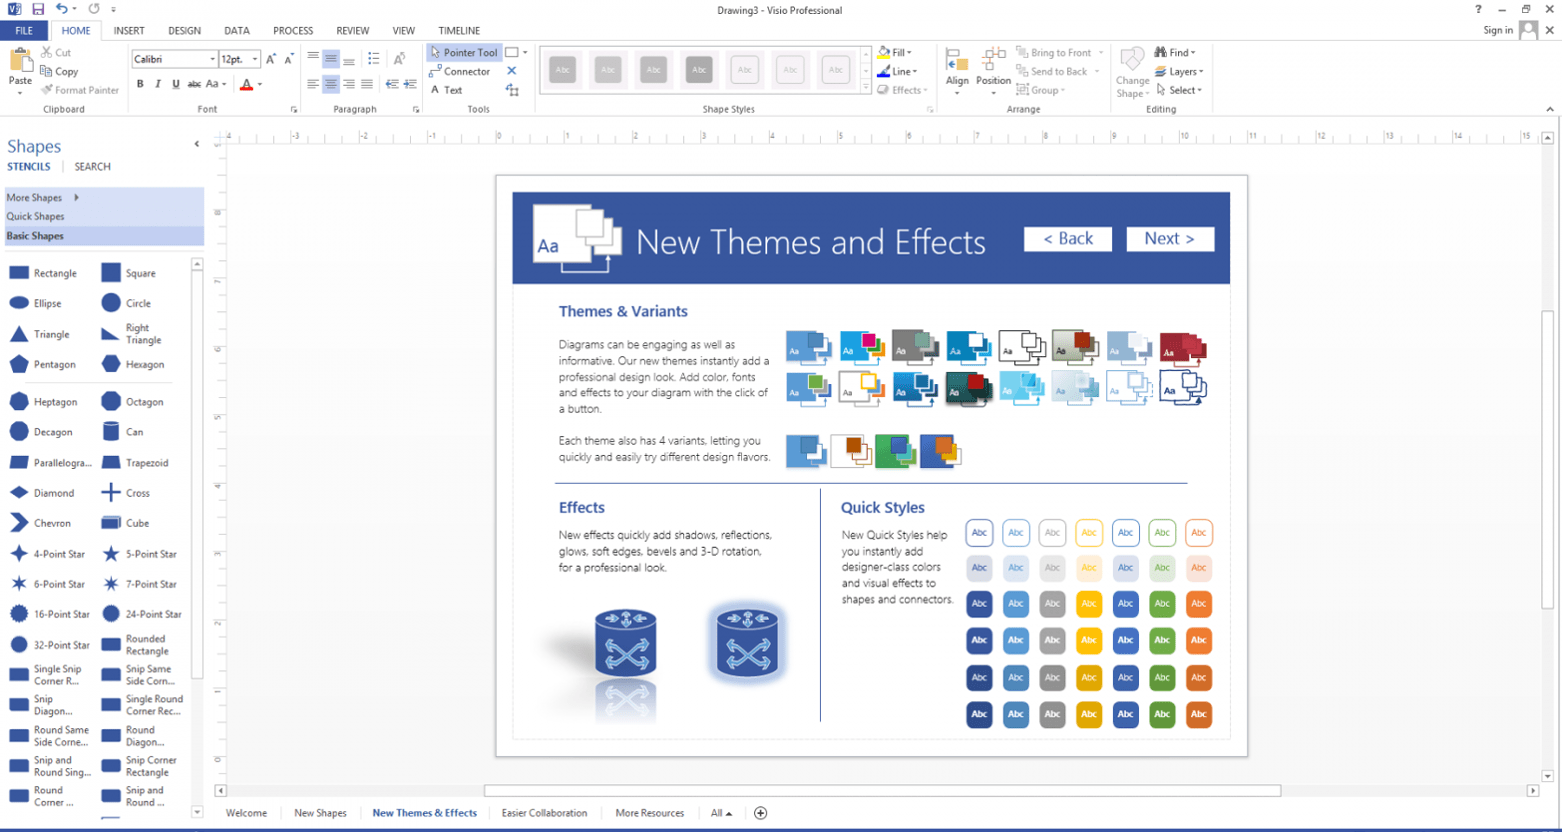 microsoft office visio professional 2007 free download full version